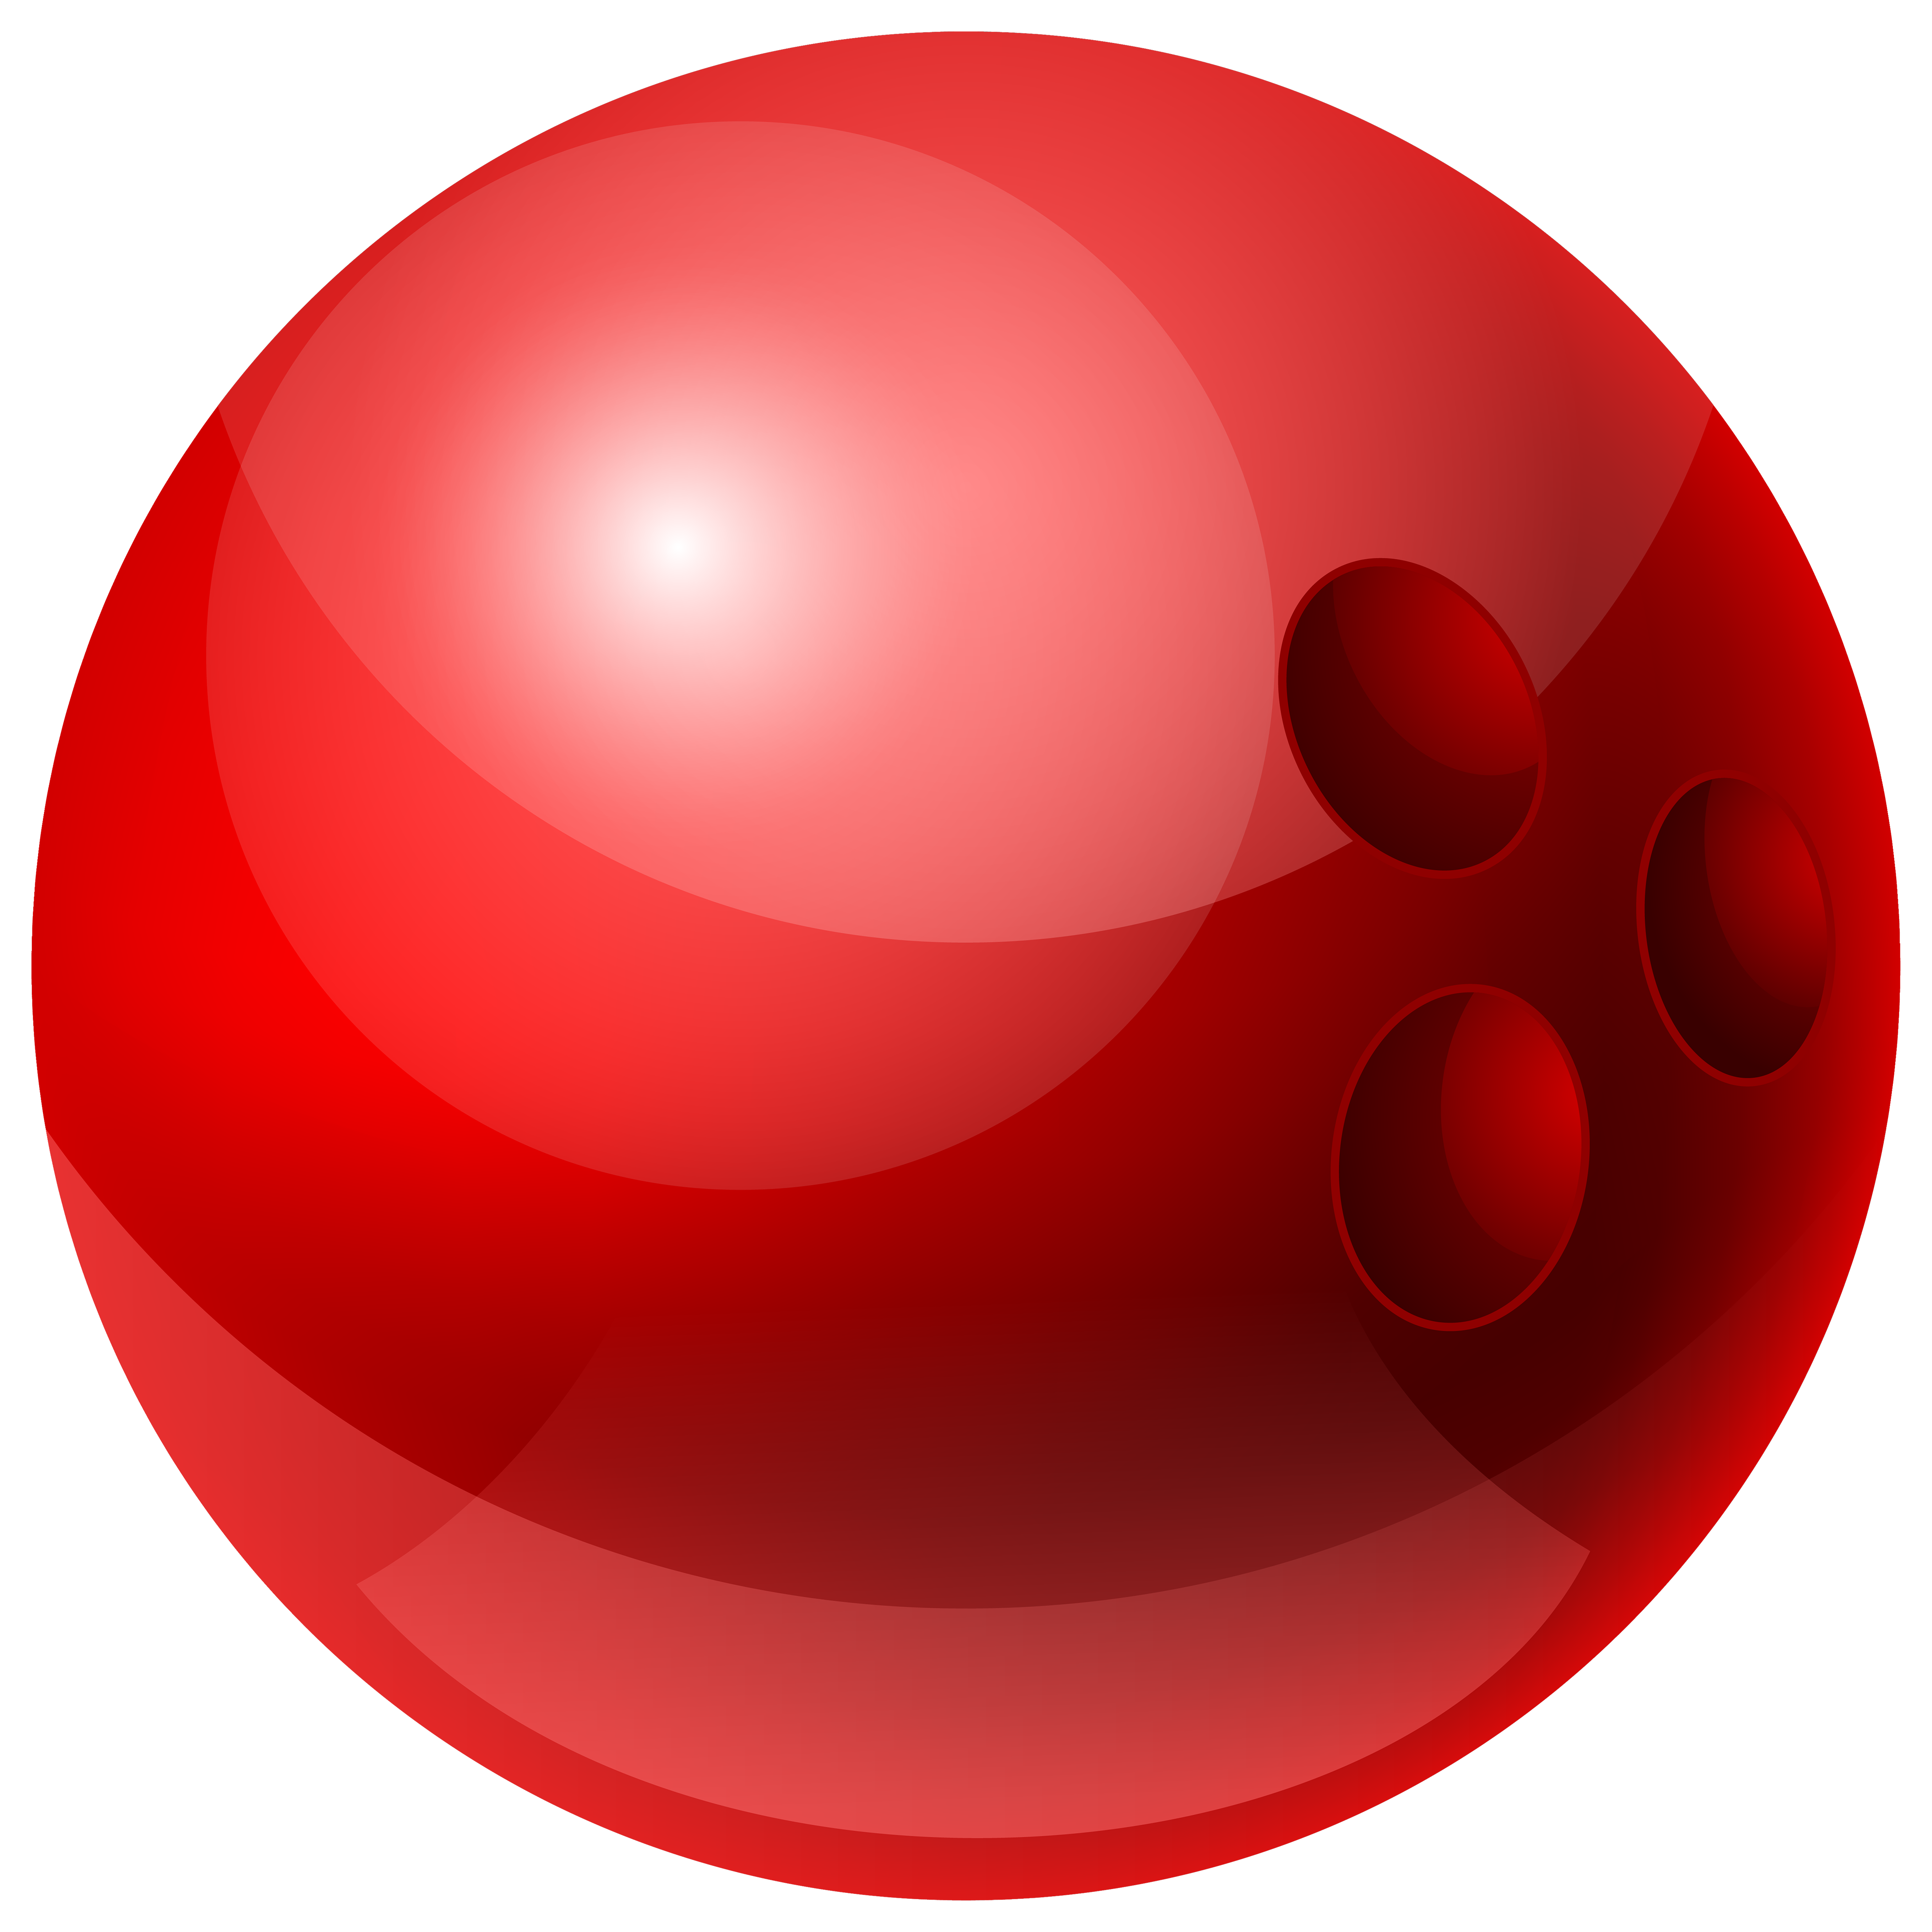 Red Bowling Ball PNG Clipart